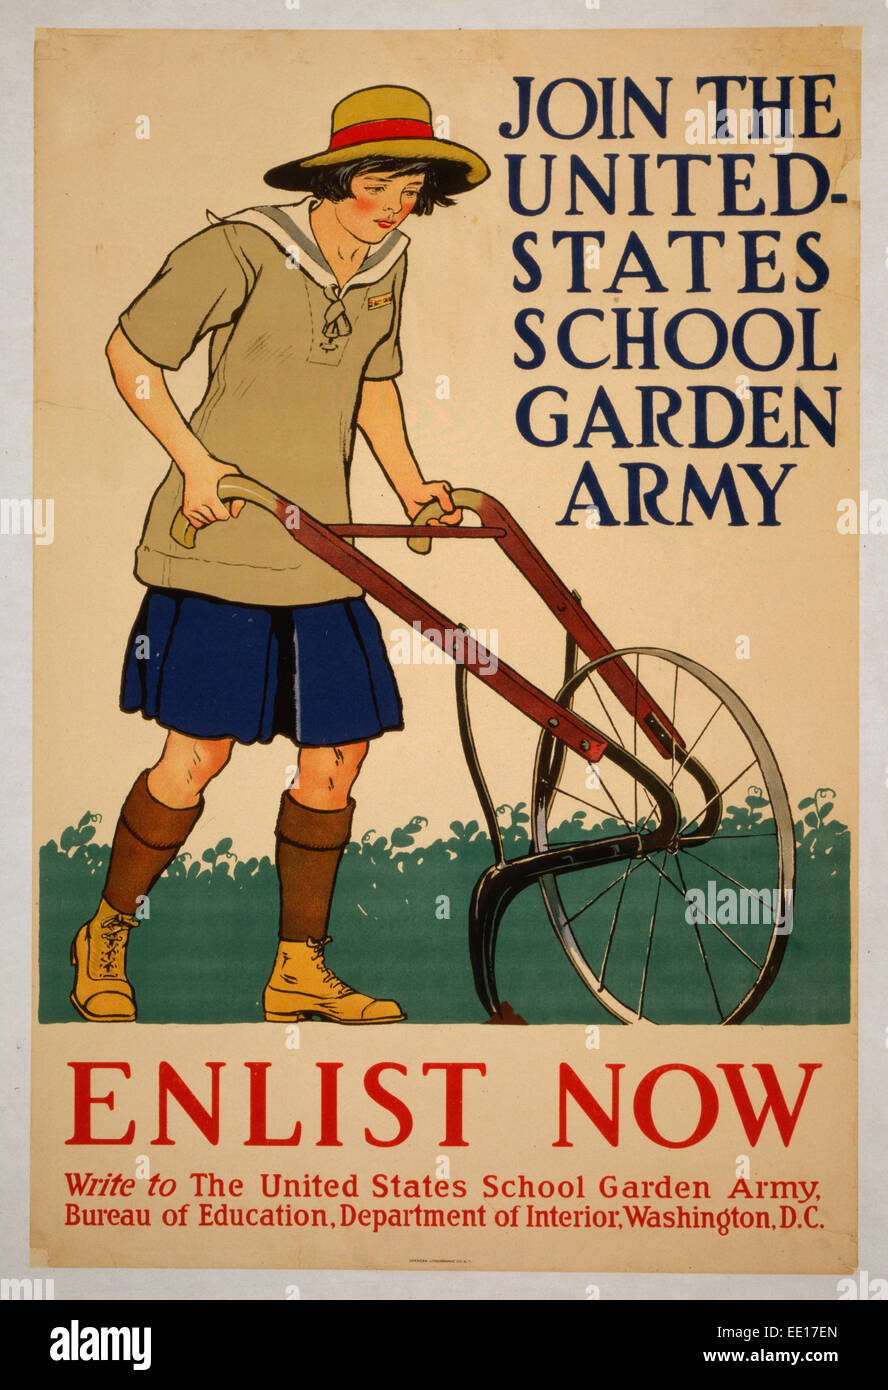 Join the United States school garden army - Enlist now.  Poster showing a girl plowing. USA Home Front, World War I, 1918 Stock Photo